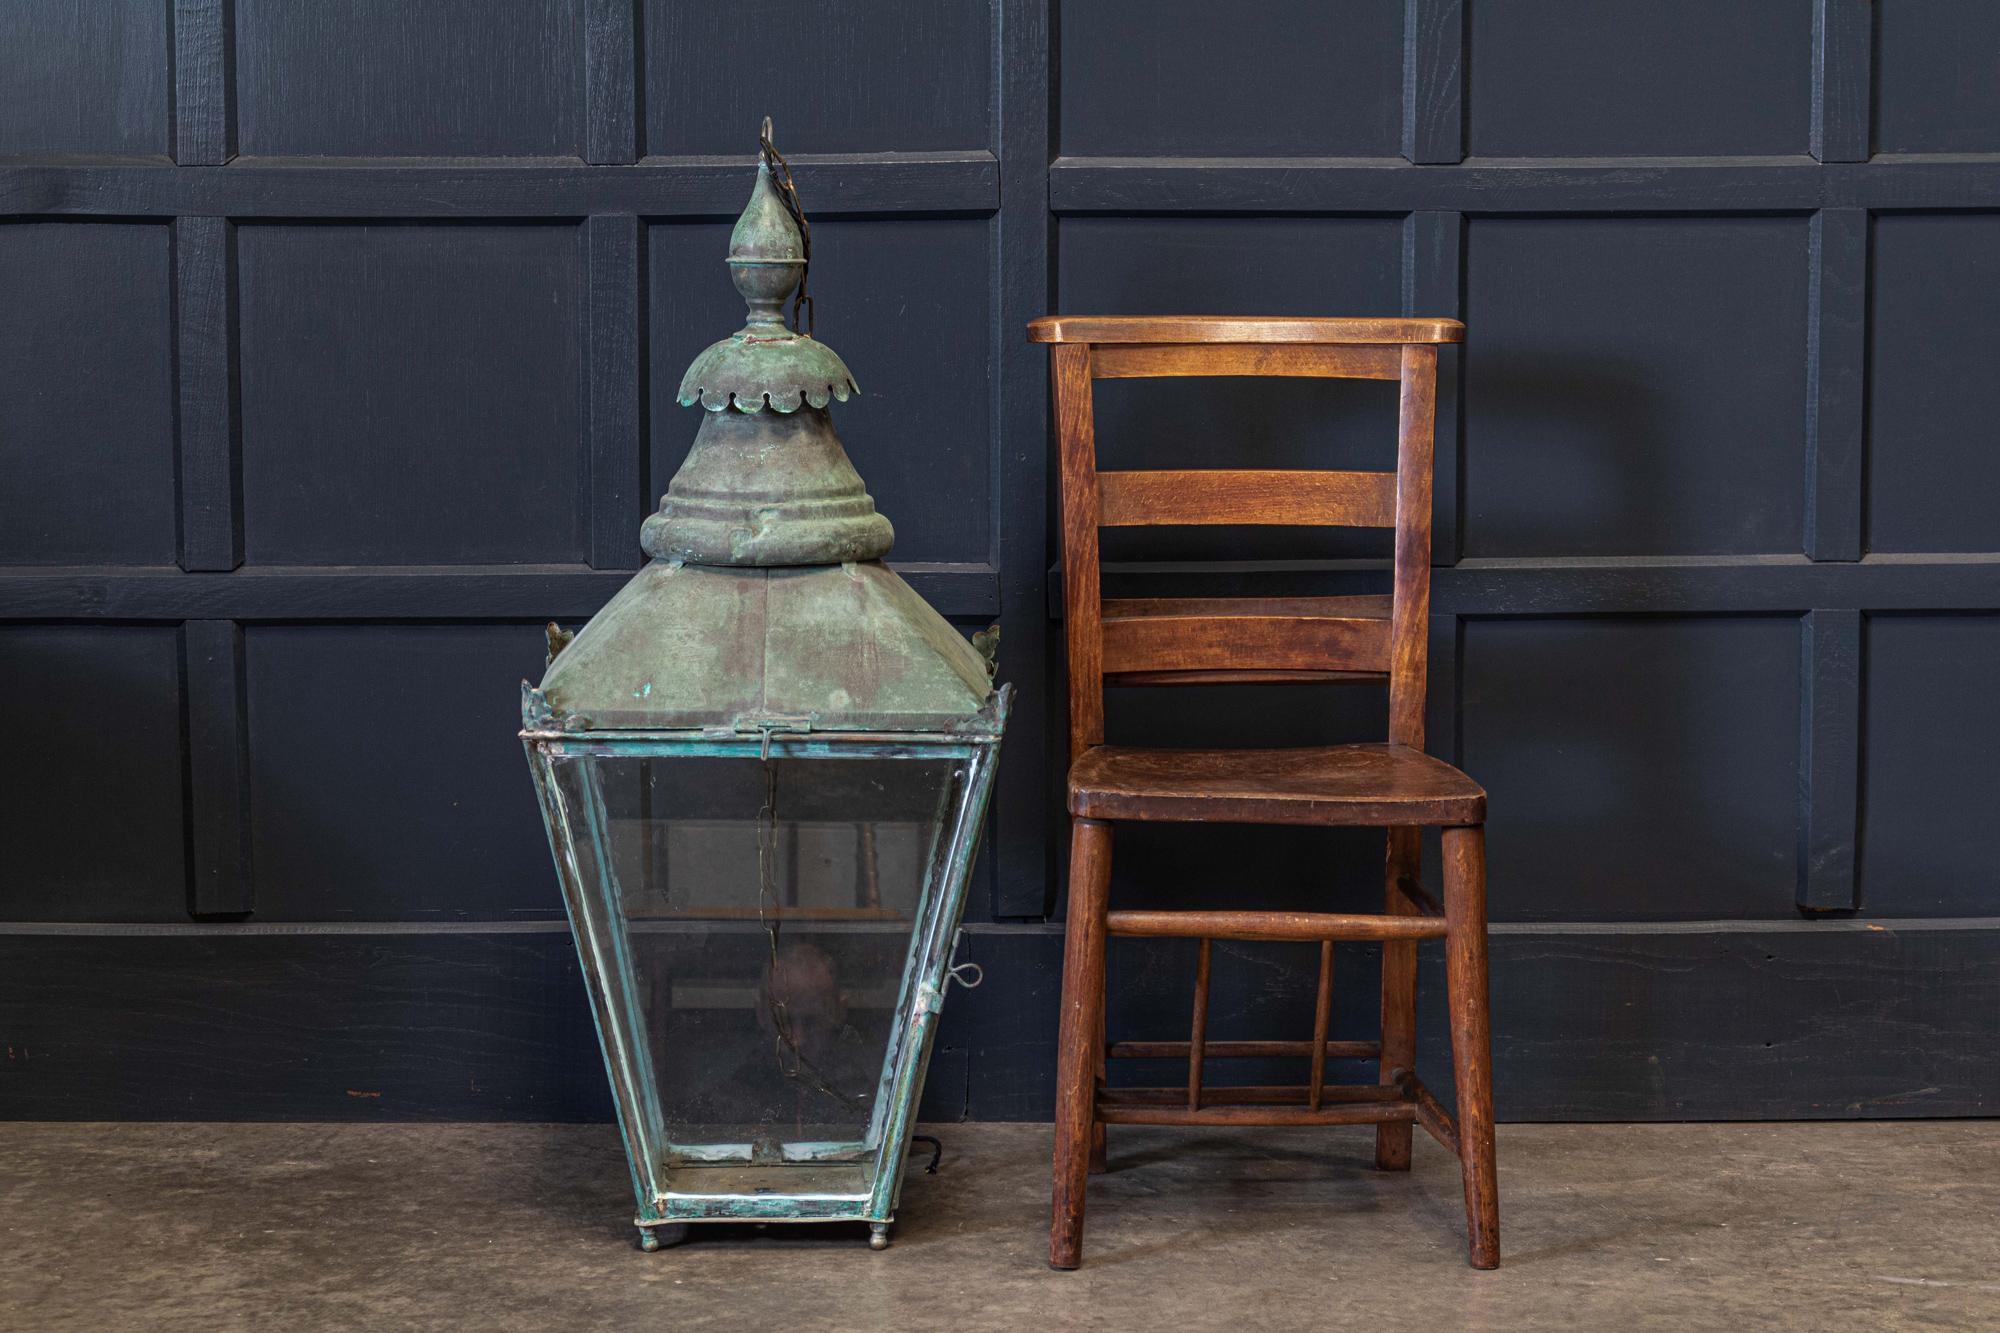 Circa 1870.

Large English 19thC Verdigris Lantern.

Glazed hinged door with excellent decorative colour, comes with 1m of silk flex, 1m of heavy gauge antique brass chain & bronze ceiling hook.

Re-glazed rewired & pat tested - ready to